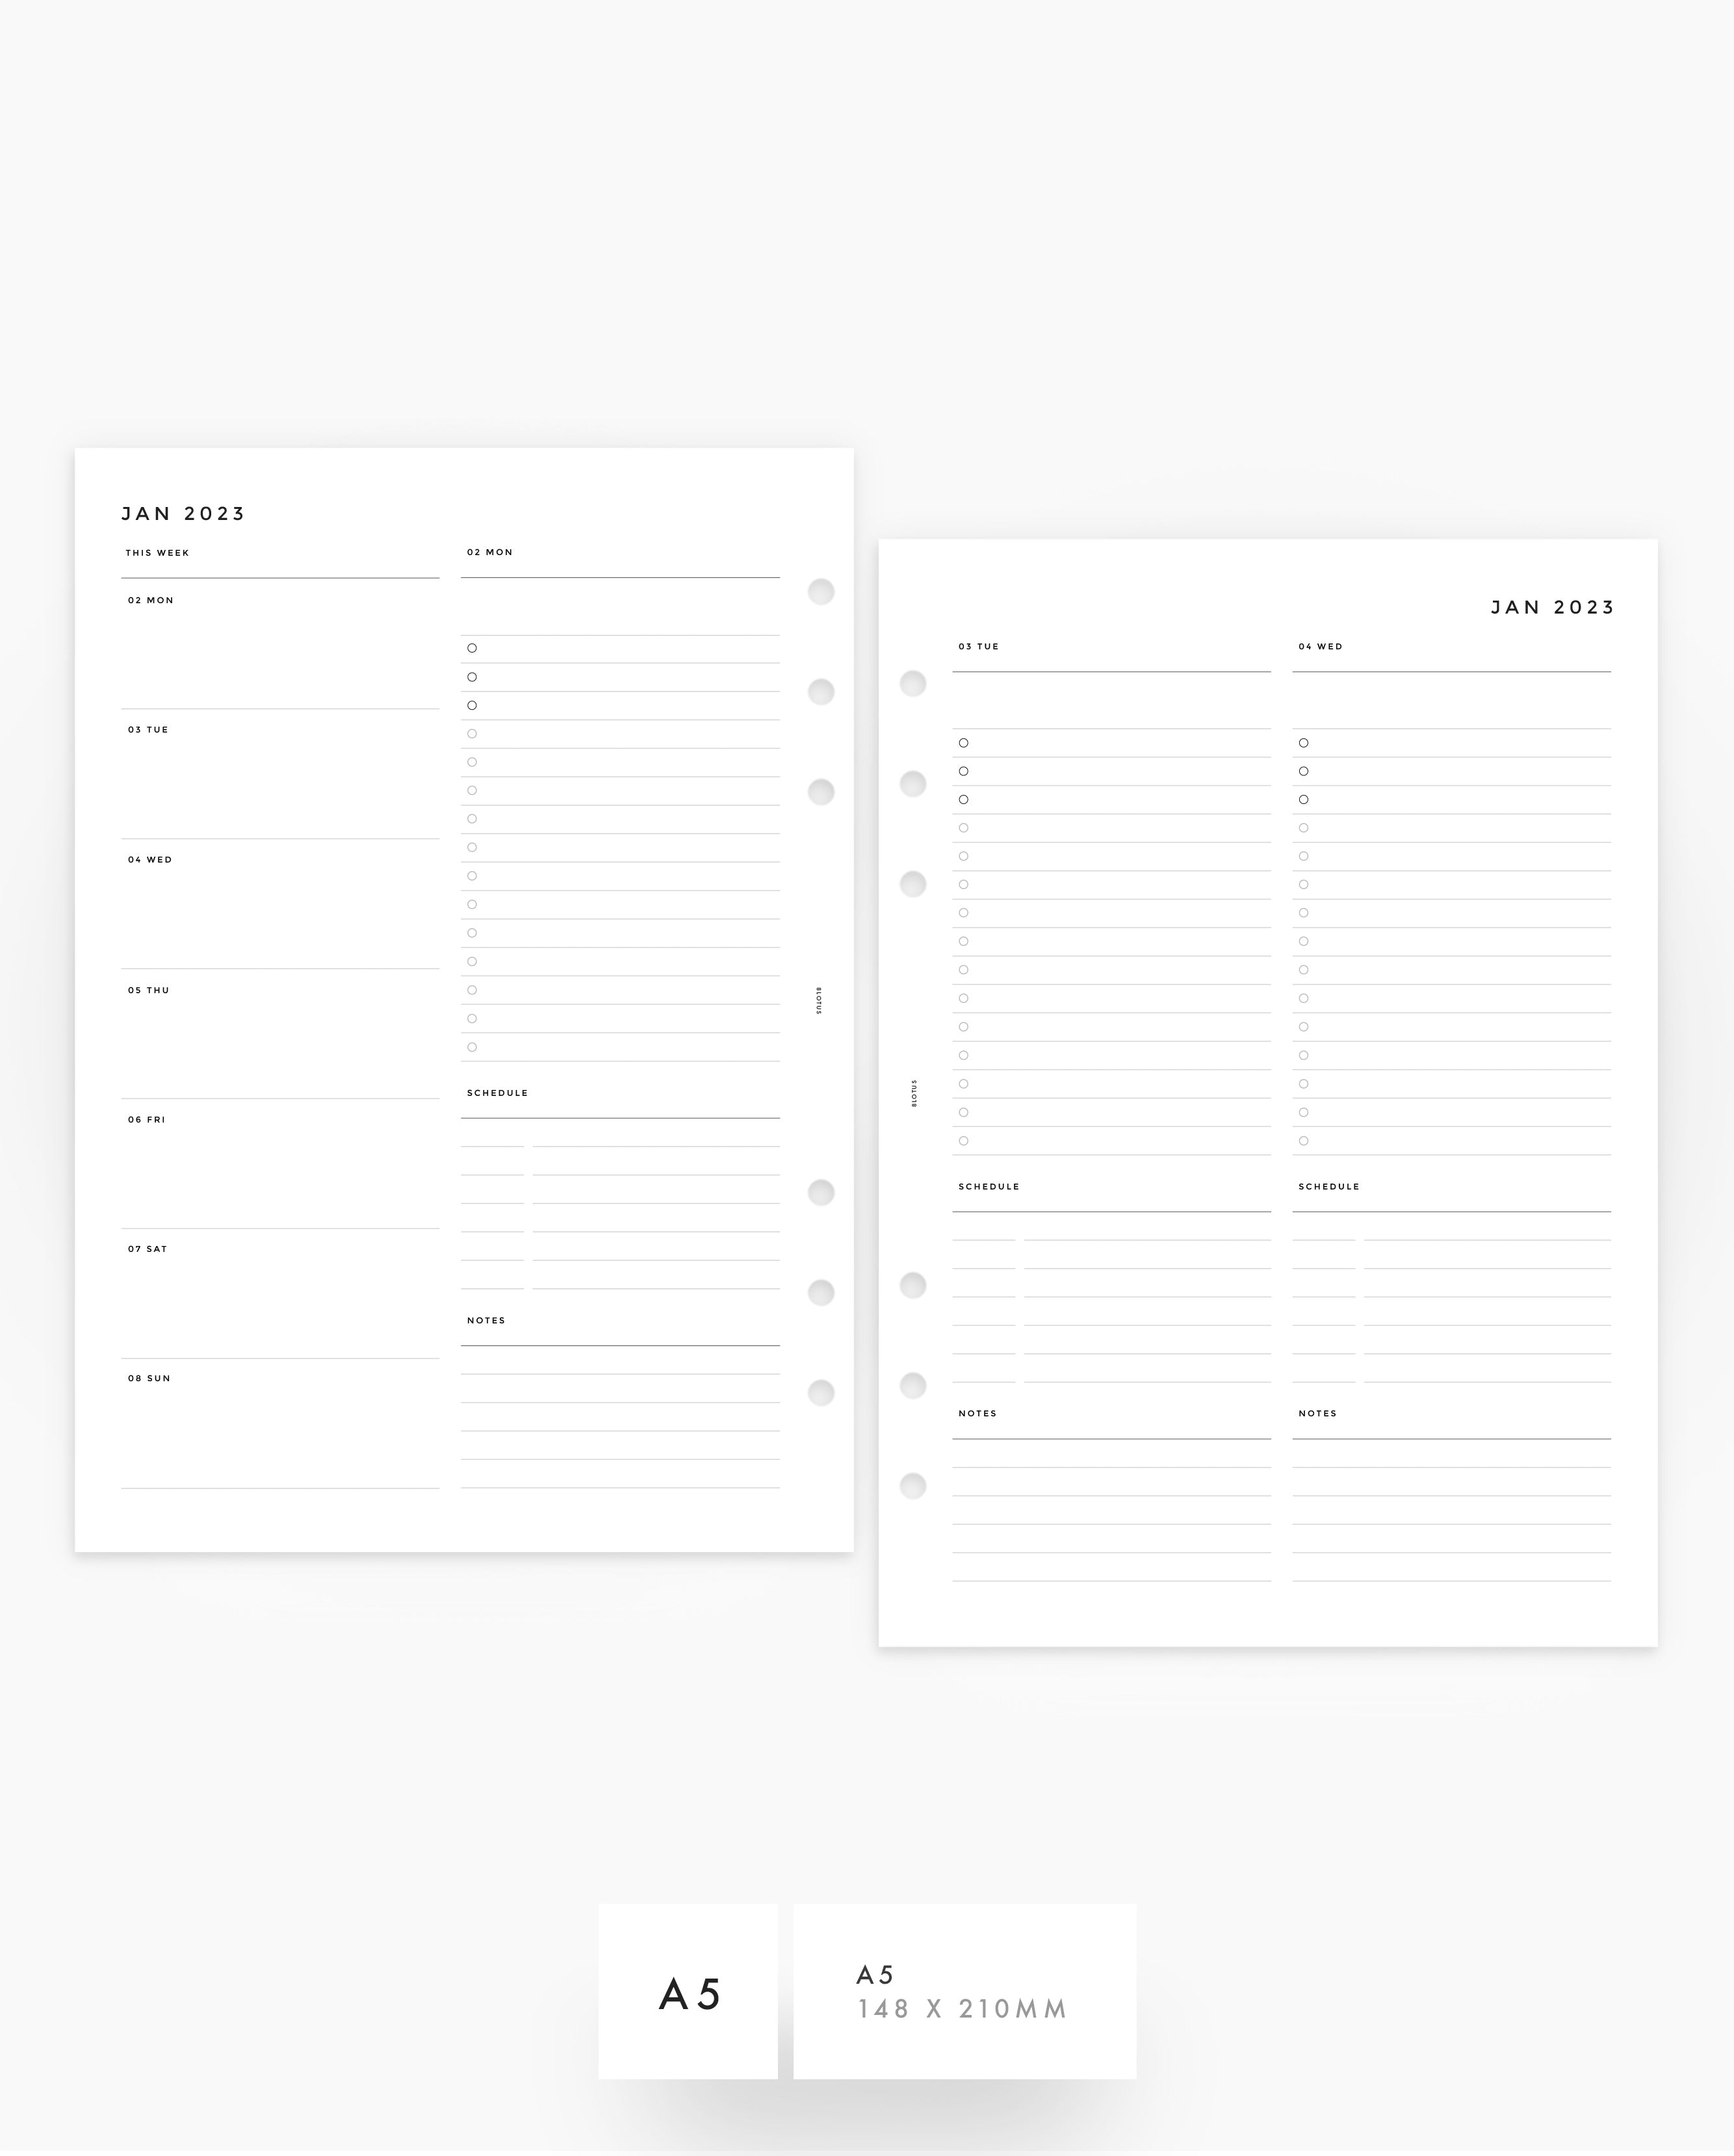 MN080A - 2023 Daily Planner - 2DO1P